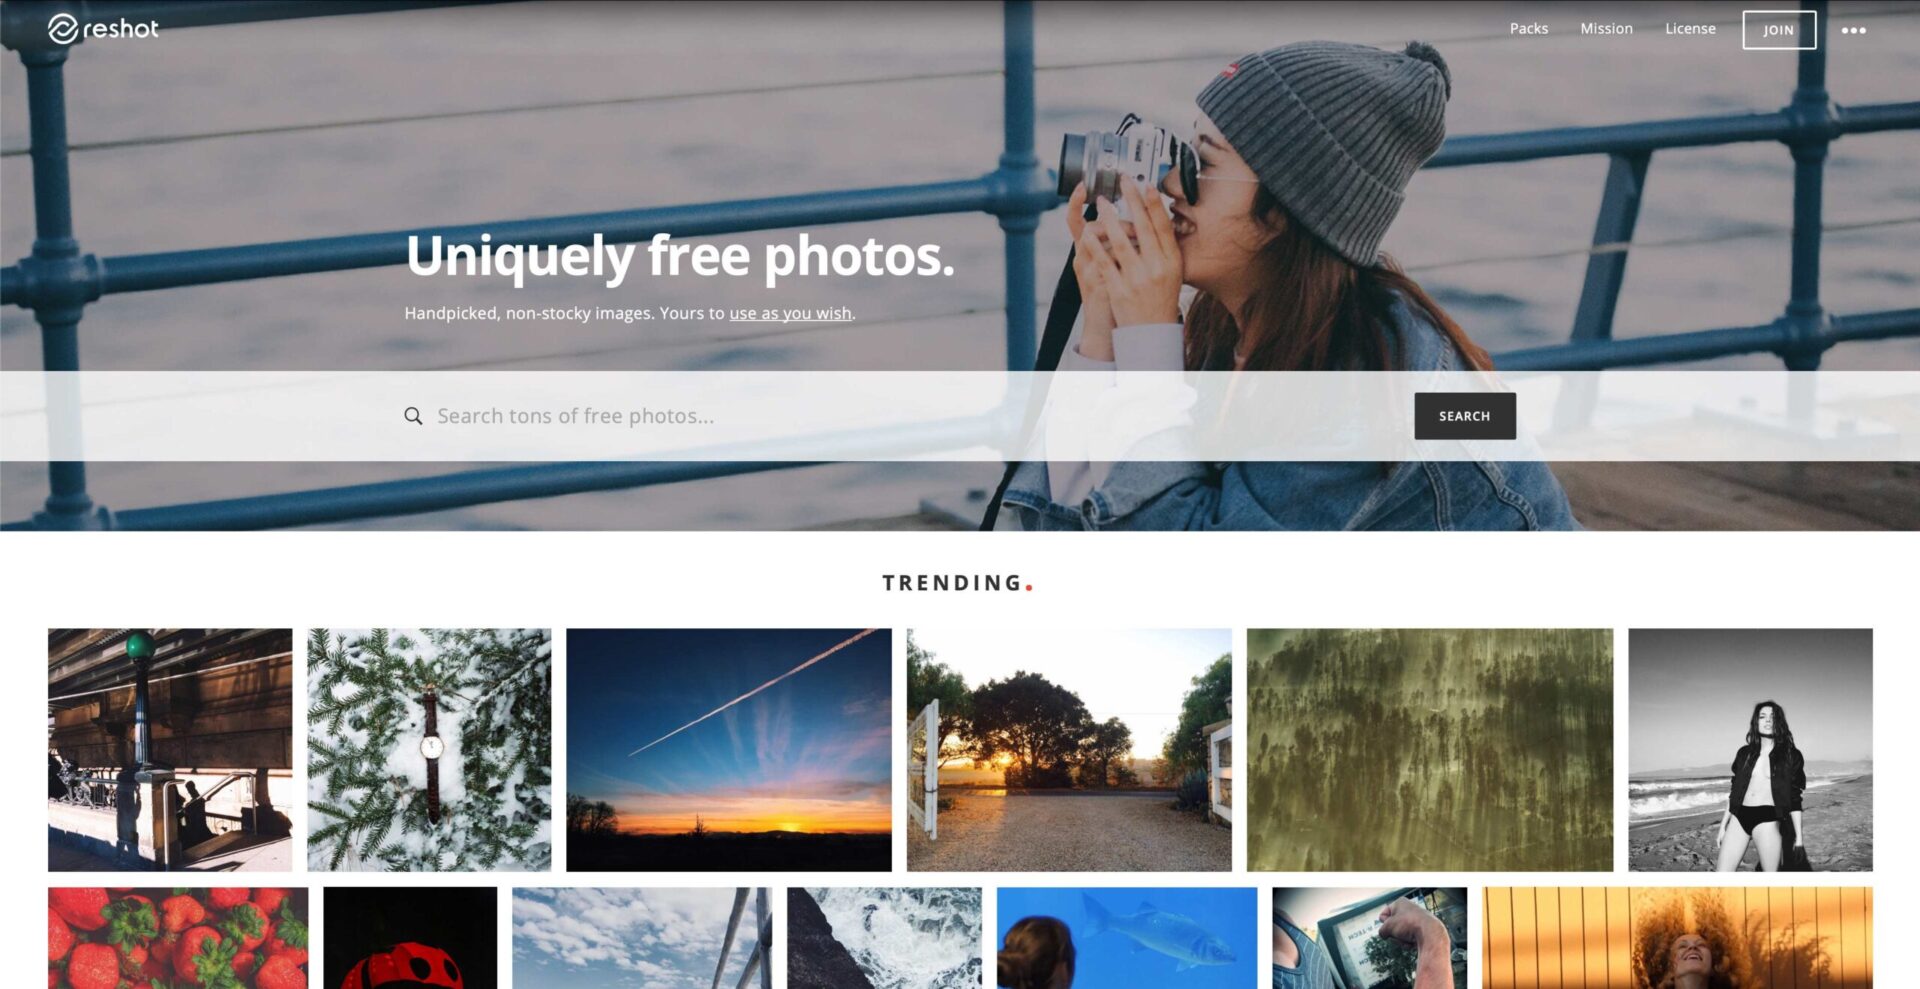 15 Free Stock Photography Websites You Should Be Using For Your Next Project - 11 Free Stock Websites reshot scaled 1